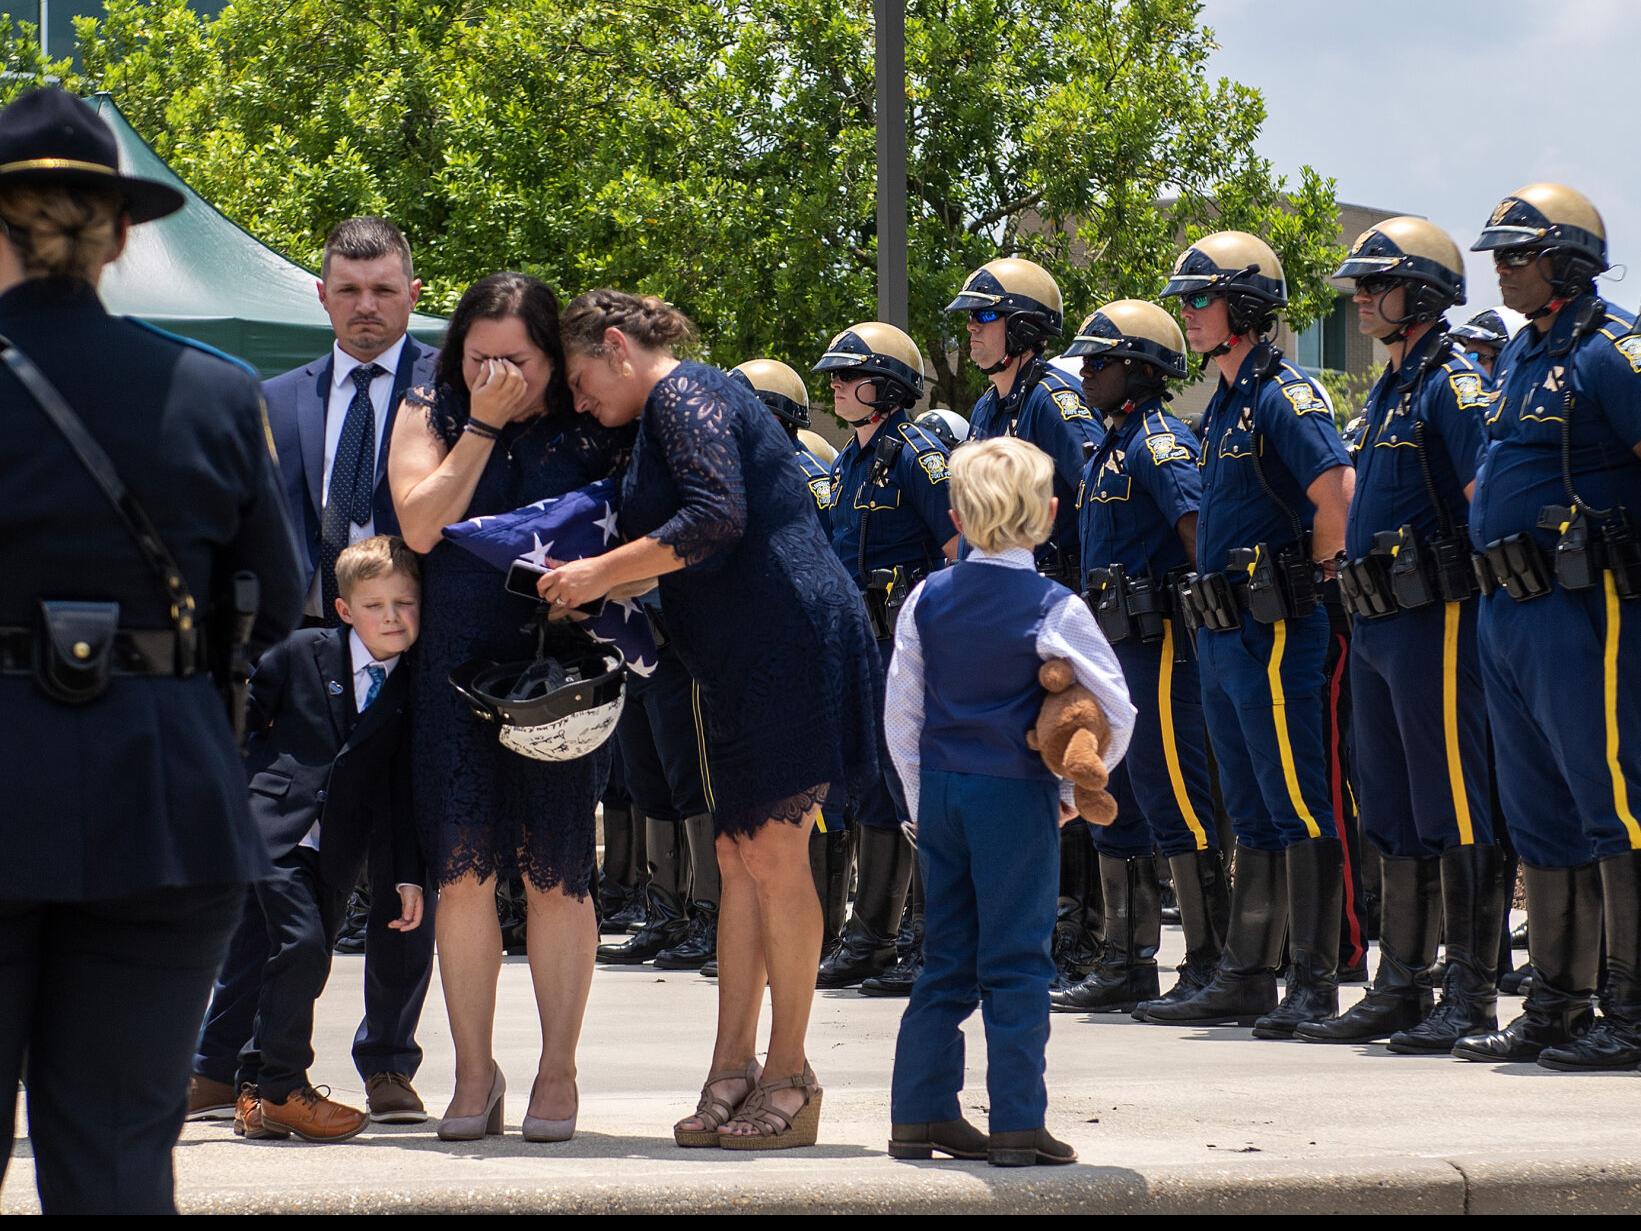 Photos: Service for Cpl. Shawn Kelly, Baton Rouge